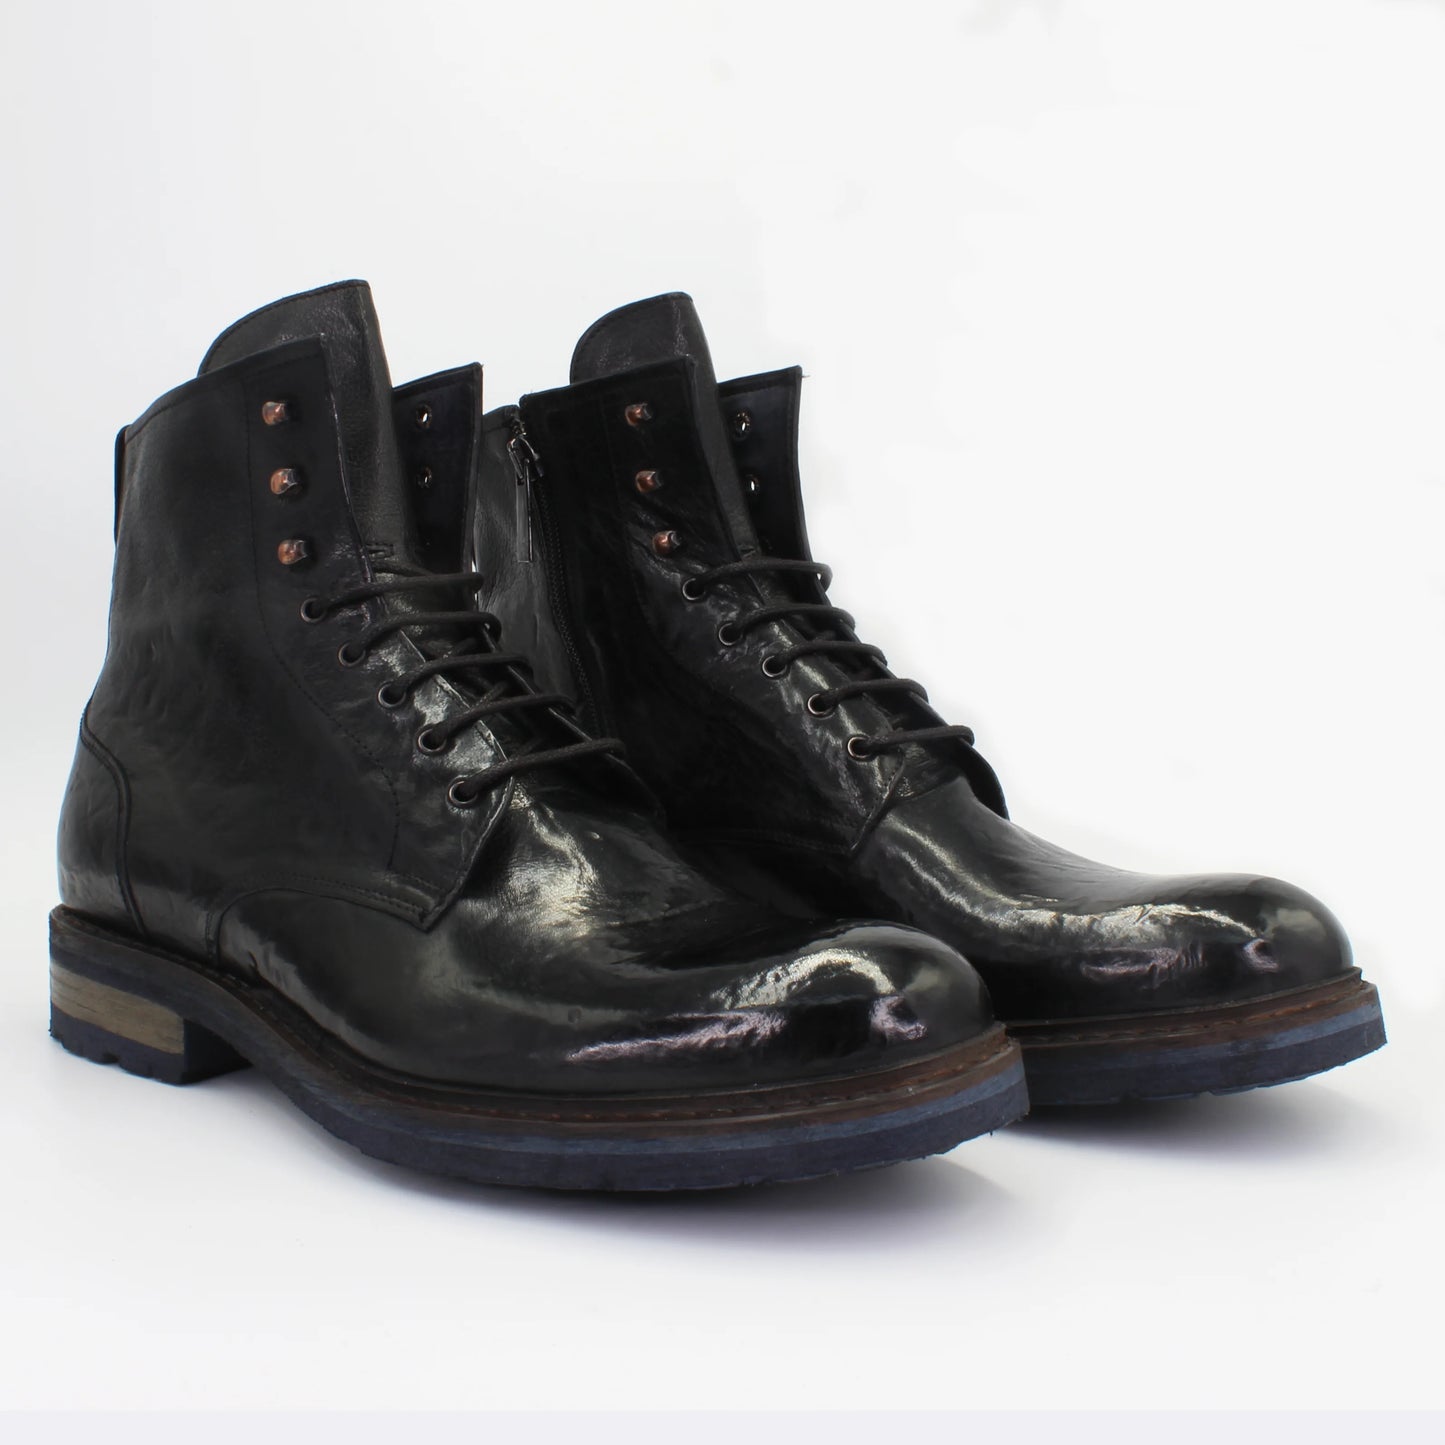 Shop Handmade Italian Leather Boot in Nero (BRU10886) or browse our range of hand-made Italian boots for men in leather or suede in-store at Aliverti Cape Town, or shop online. We deliver in South Africa & offer multiple payment plans as well as accept multiple safe & secure payment methods.